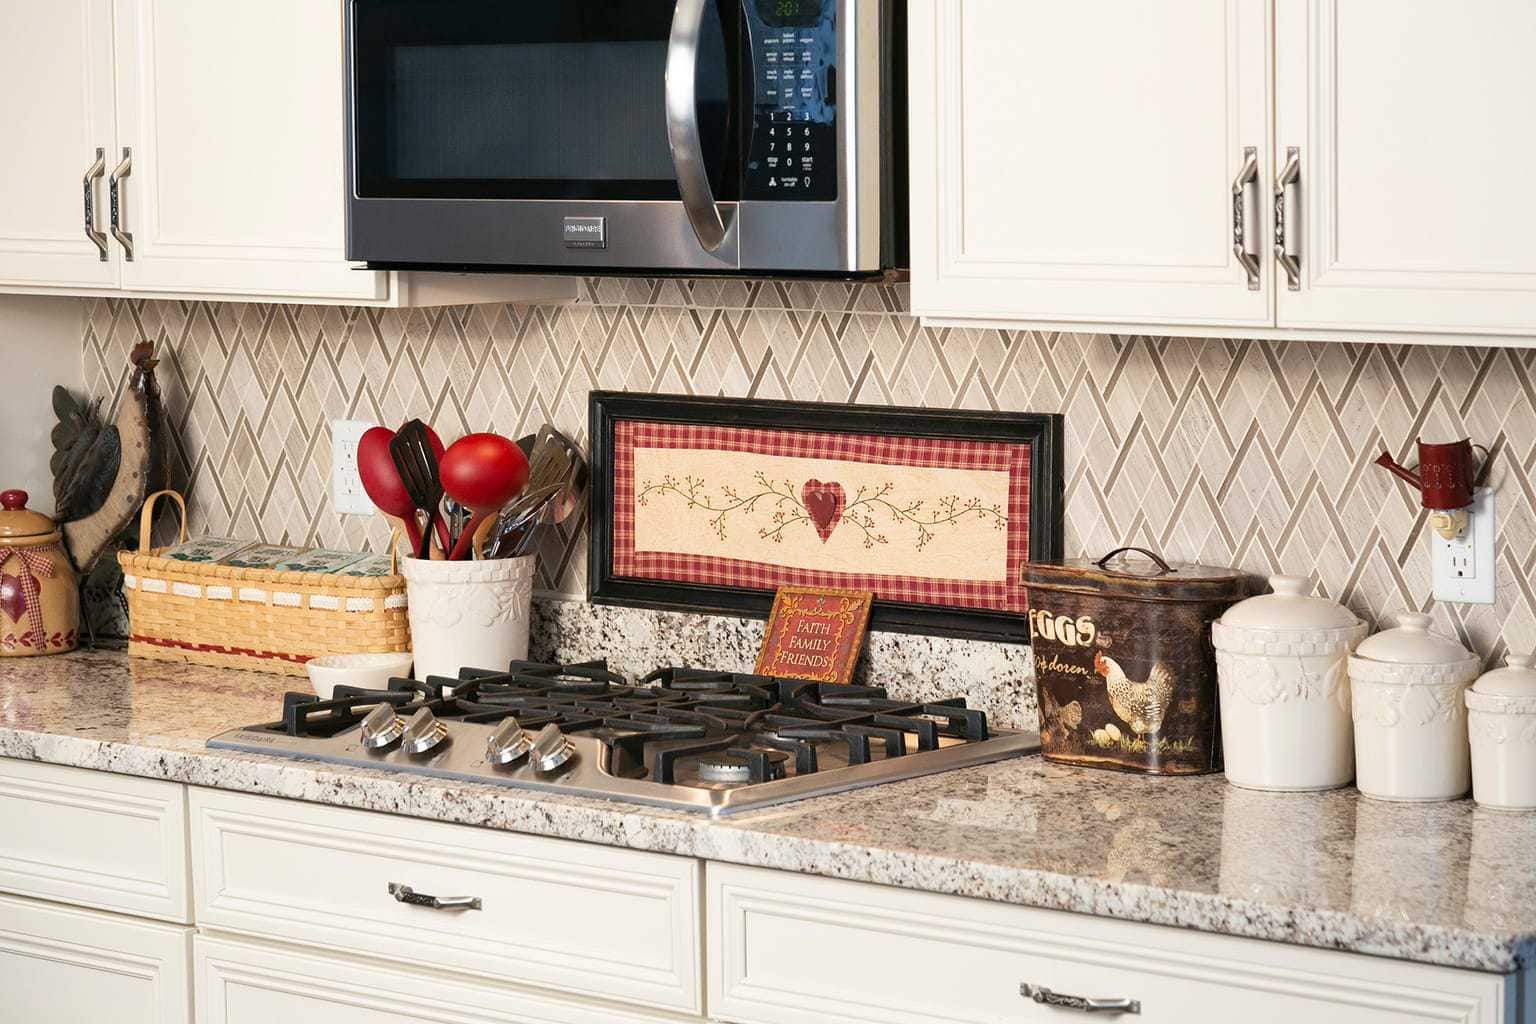 Kitchen Tile Backsplash Ideas That Are Easy And Inexpensive